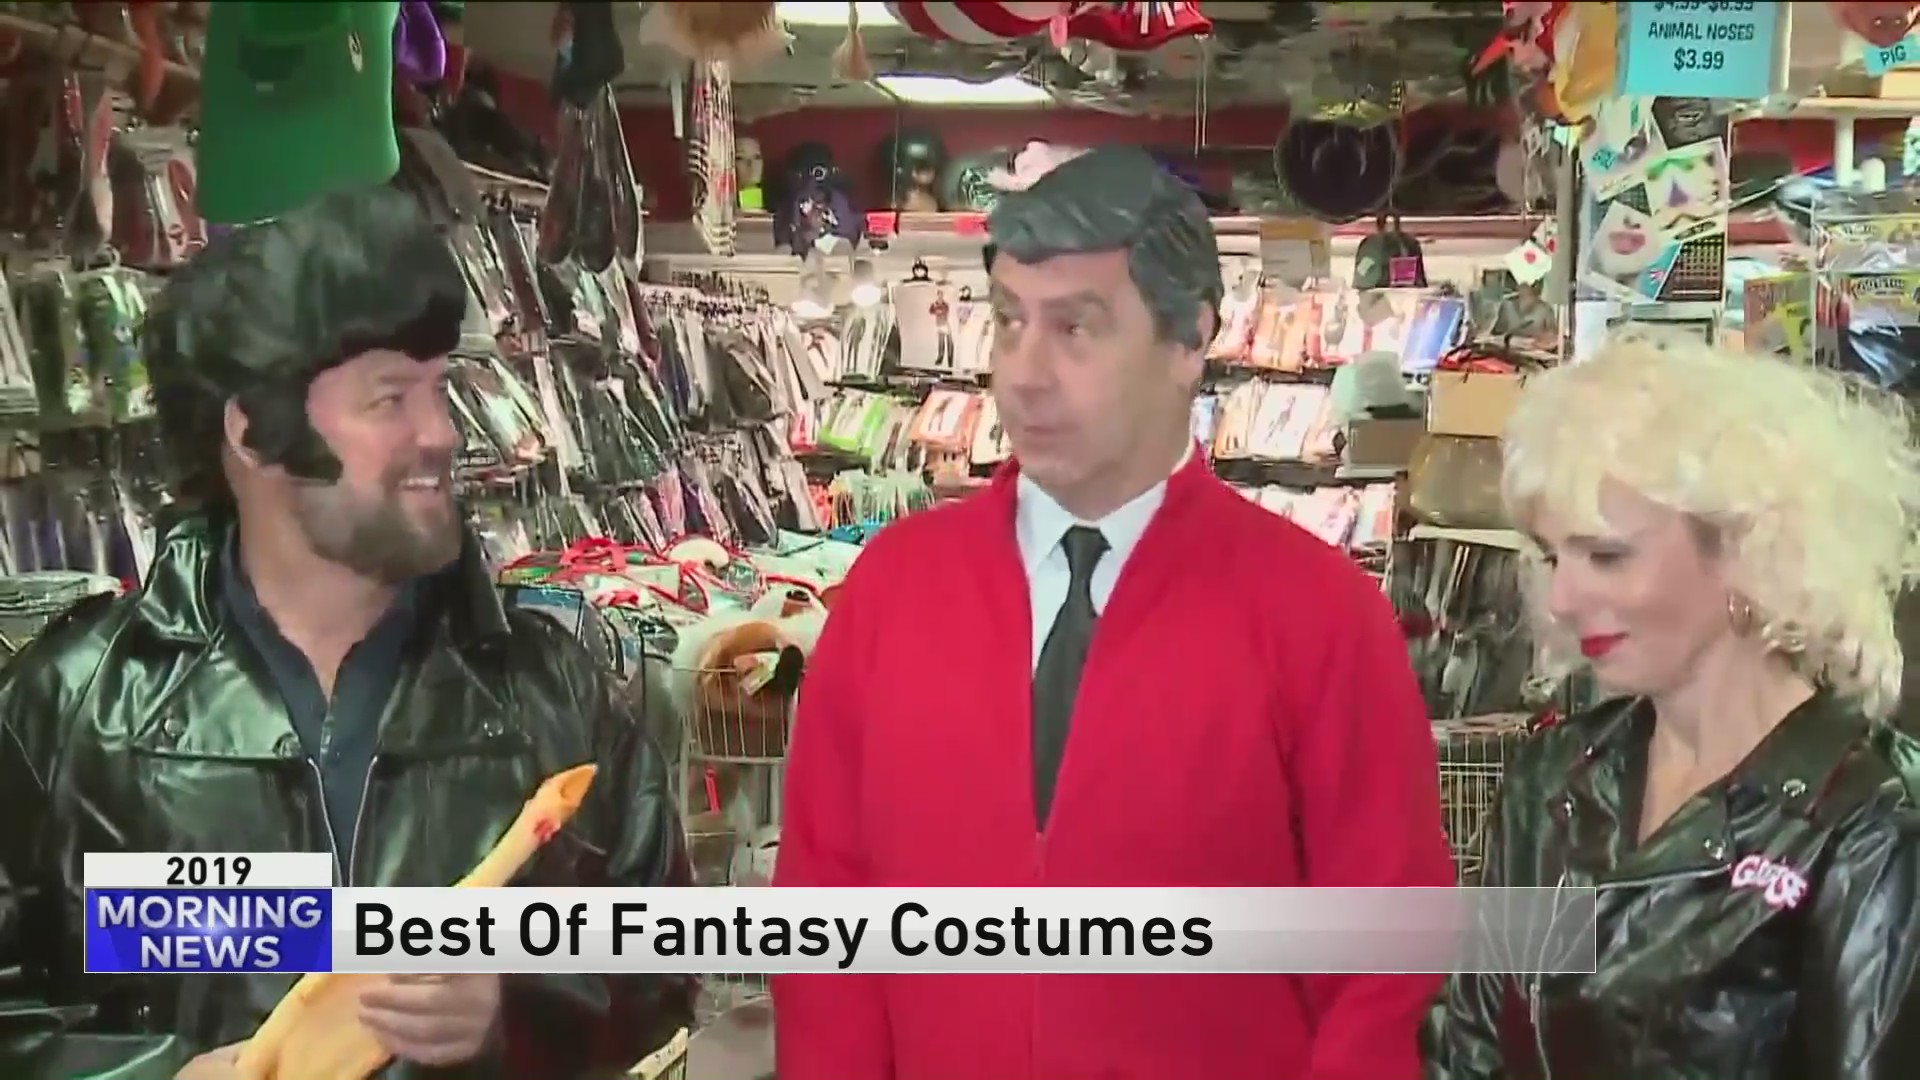 Around Town recaps the “Best Of” Fantasy Costumes throughout the years